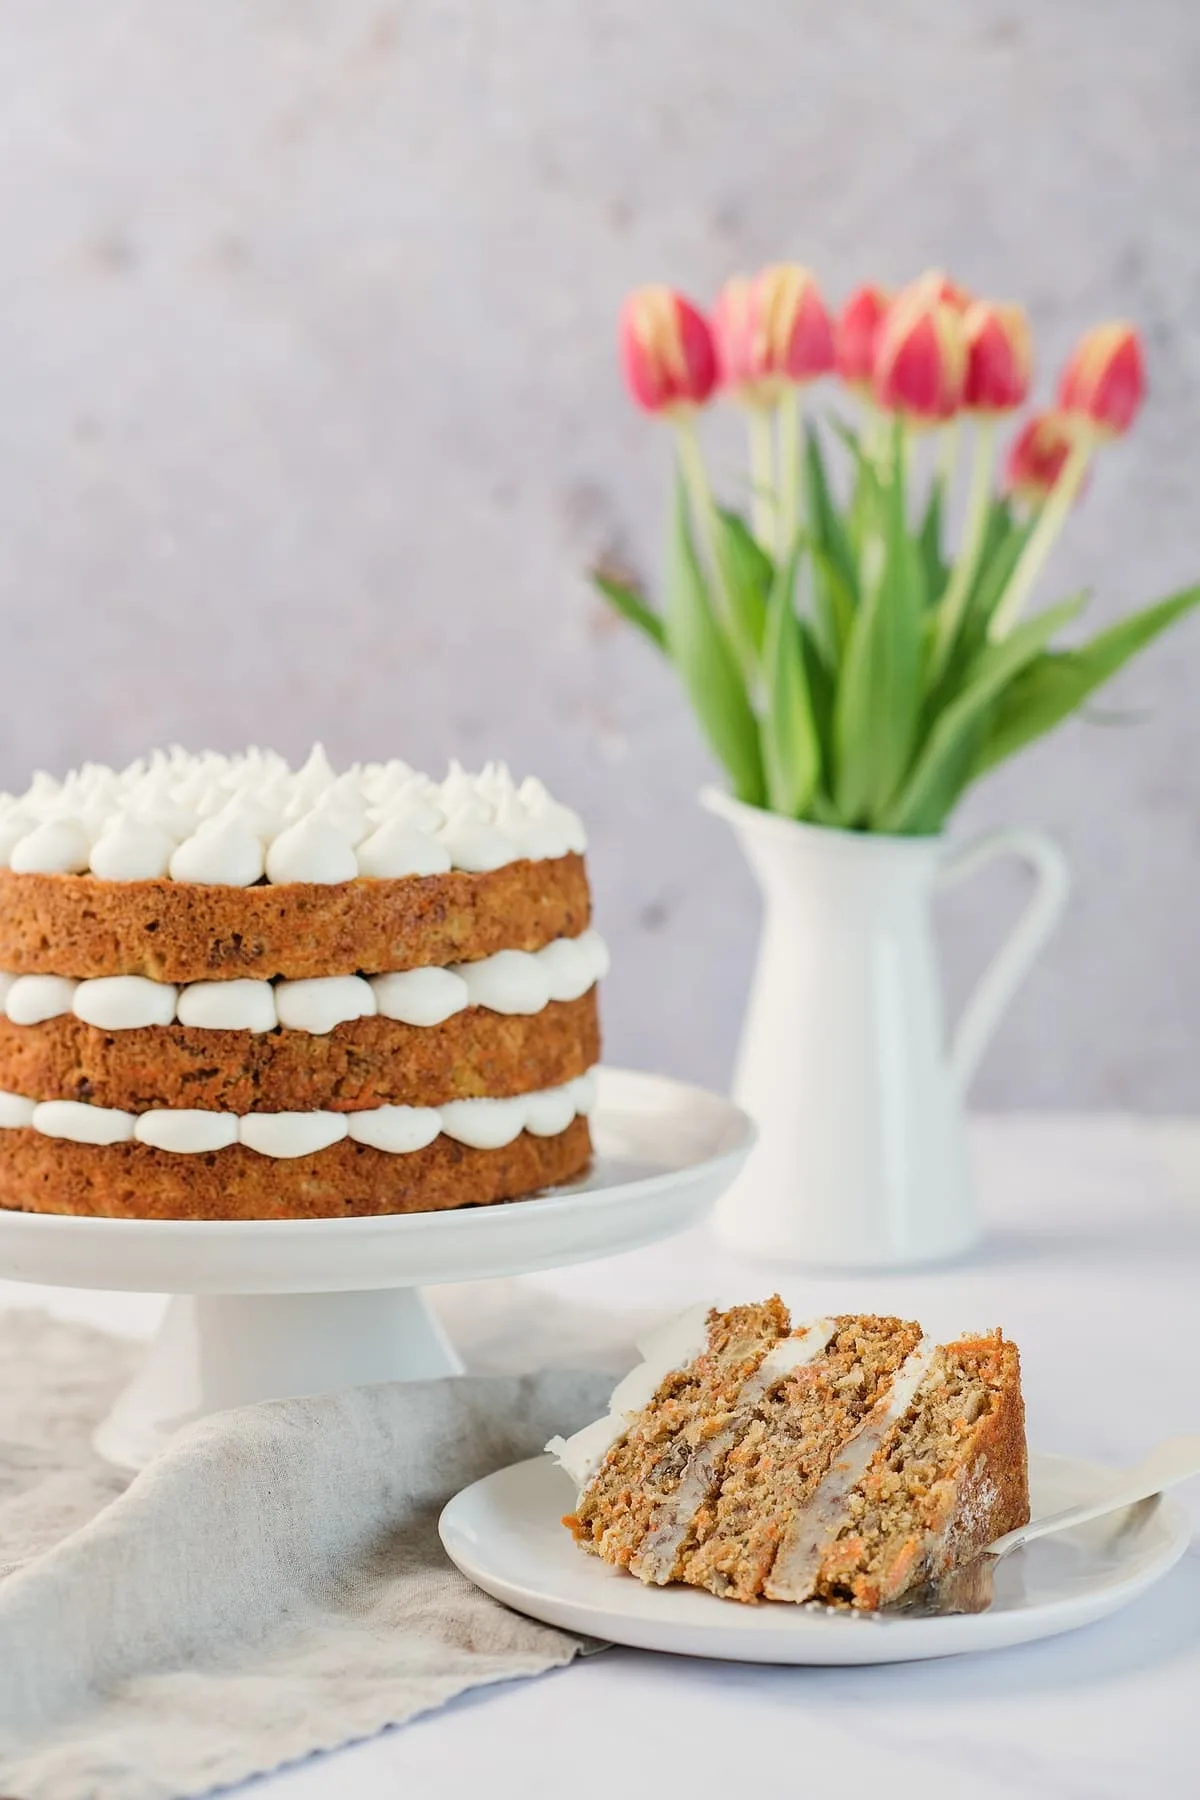 Frog Commissary Carrot Cake with Pecan Filling and Cream Cheese Frosting